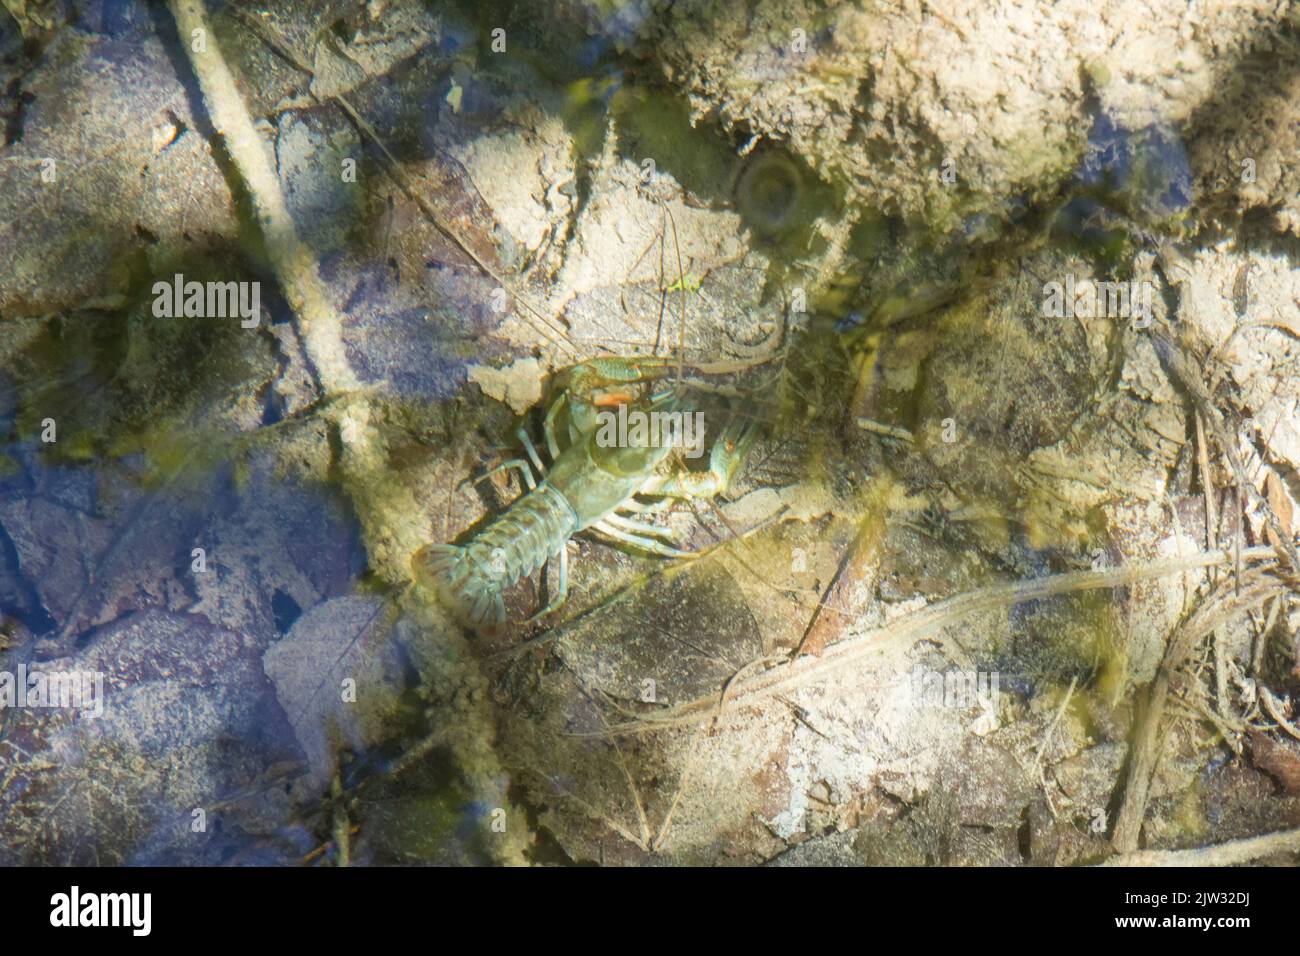 A European crayfish (Astacus astacus) in the shallow clear water of a pool seen from above. Plitvice Lakes National Park, Coatia, Europe. Stock Photo